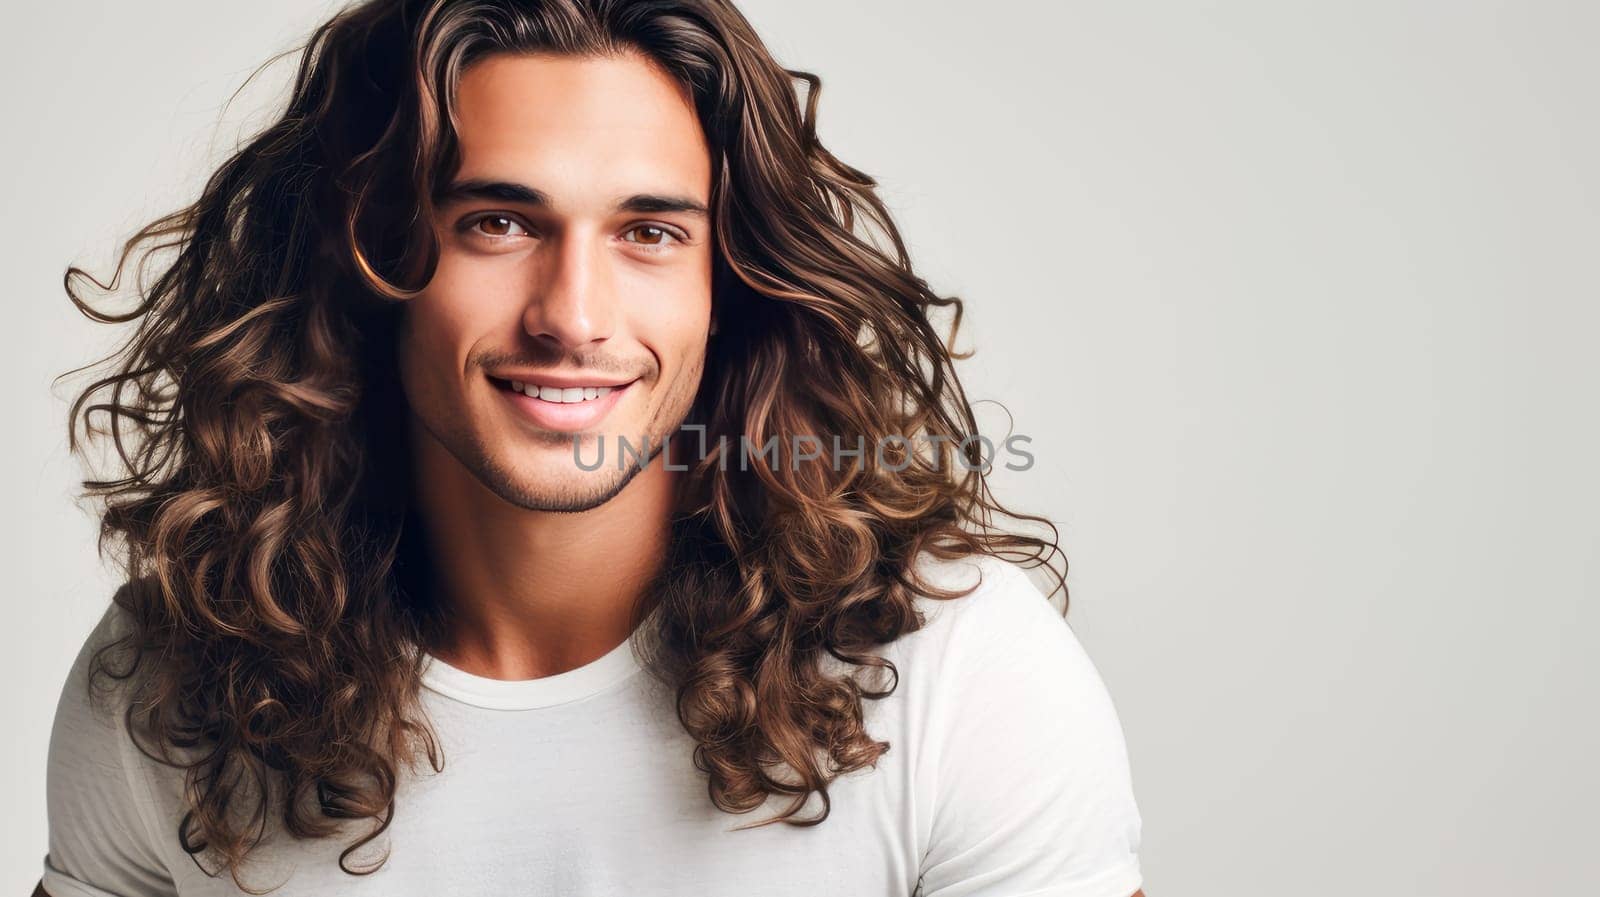 Portrait of an elegant sexy smiling Latino man with perfect skin and long hair, on a white background. Advertising of cosmetic products, spa treatments shampoos and hair care products, dentistry and medicine, perfumes and cosmetology for men